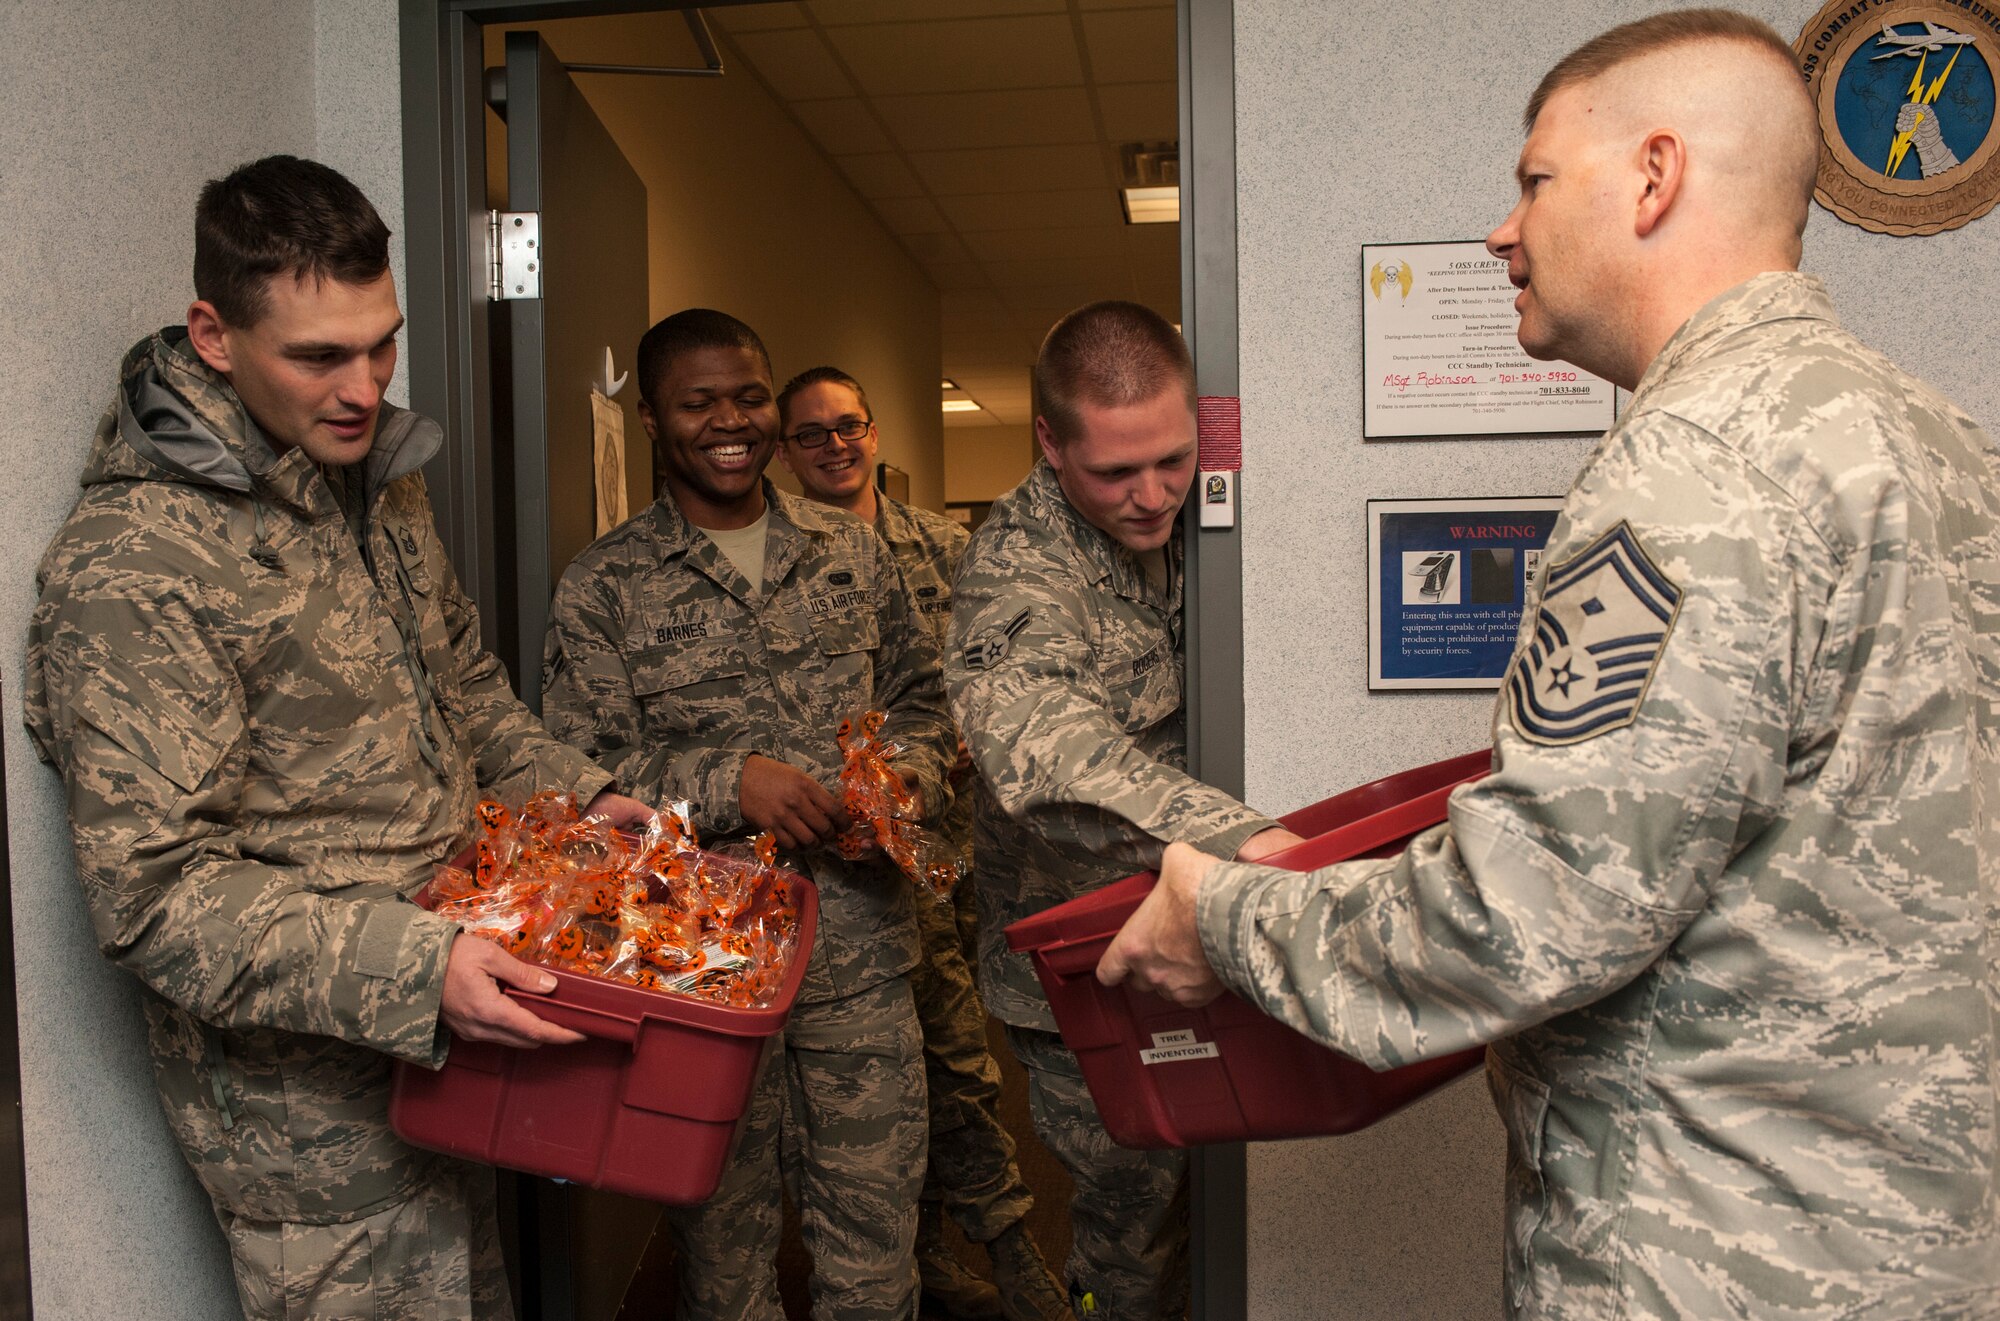 Team Minot first sergeants deliver a late night treat to Airmen assigned to the 5th Operations Support Squadron at Minot Air Force Base, N.D., Oct. 31, 2013. The group delivered cookies, apples and hot coco to Airmen working afternoon shifts on the flight line and at other 5th Bomb Wing support squadrons. (U.S. Air Force photo/Senior Airman Stephanie Sauberan)